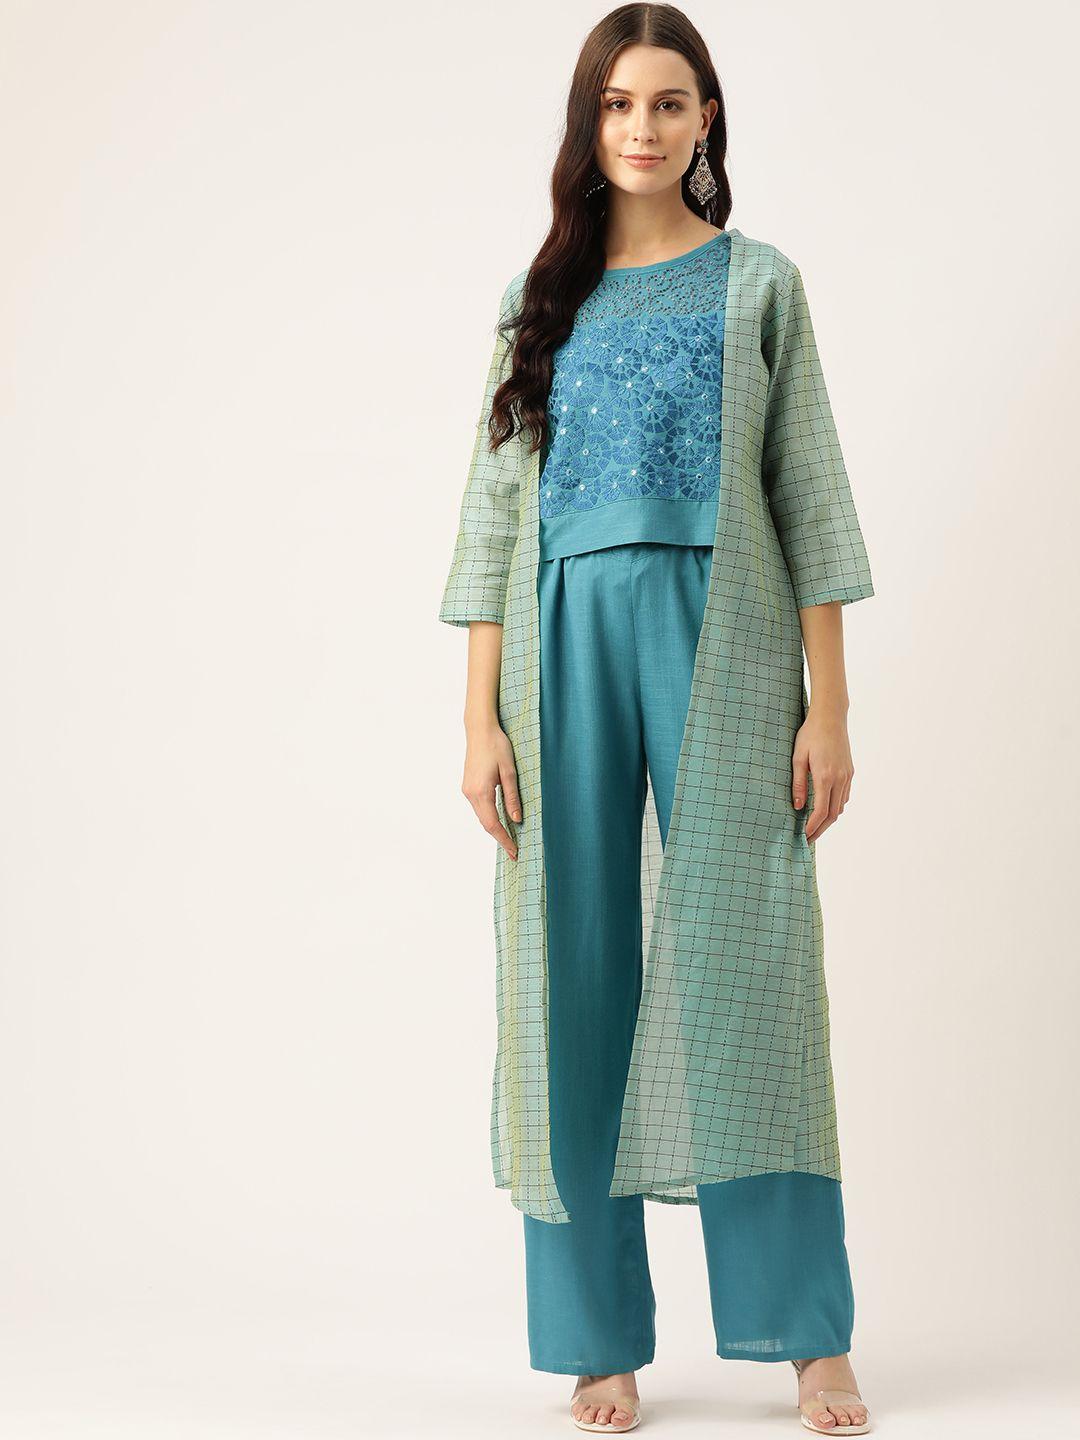 rue-collection-embroidered-ethnic-co-ords-with-shrug